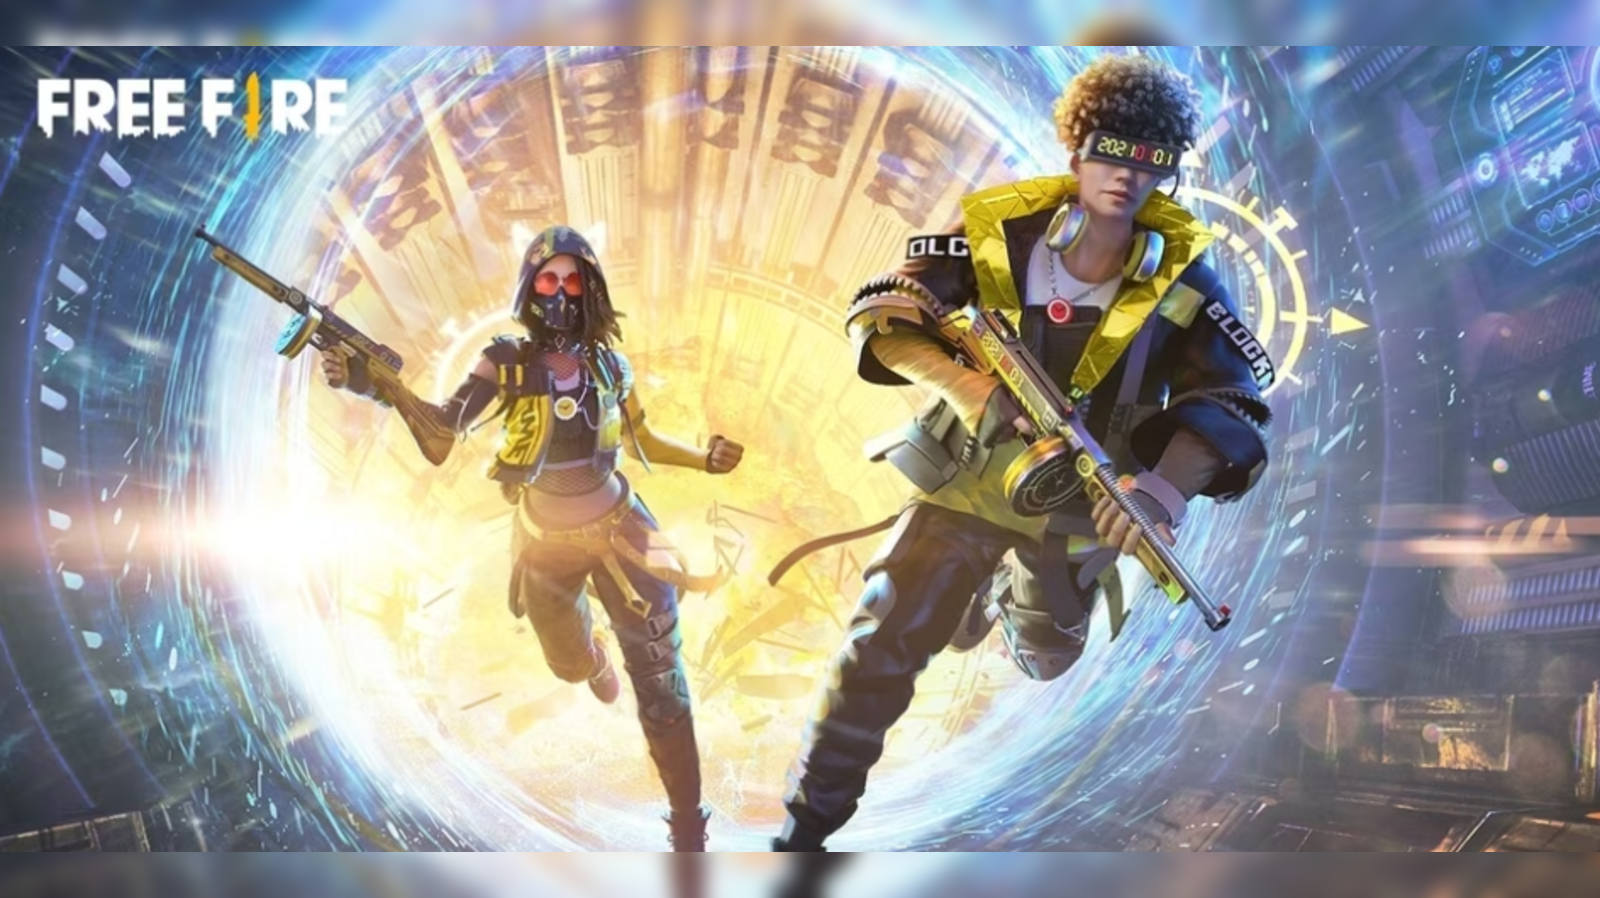 Online gaming giant Garena Revives Free Fire in India with Yotta